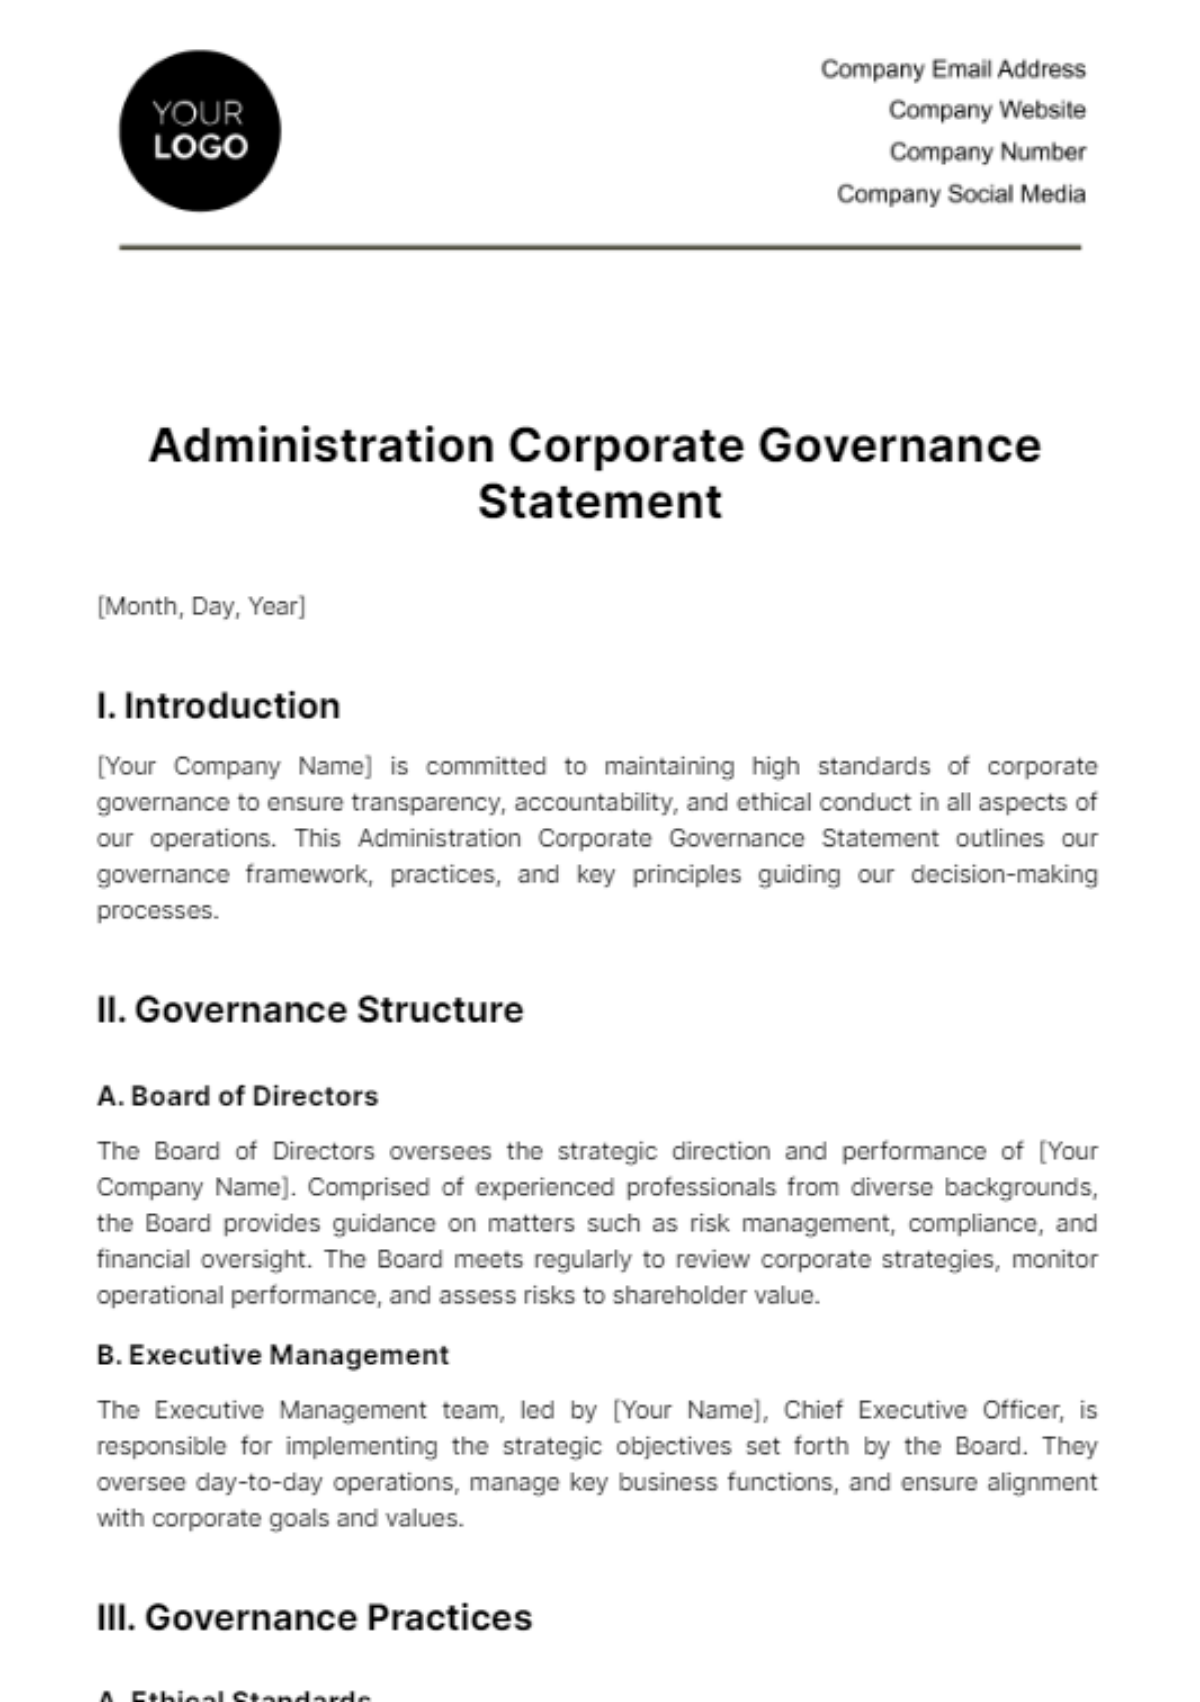 Free Administration Corporate Governance Statement Template